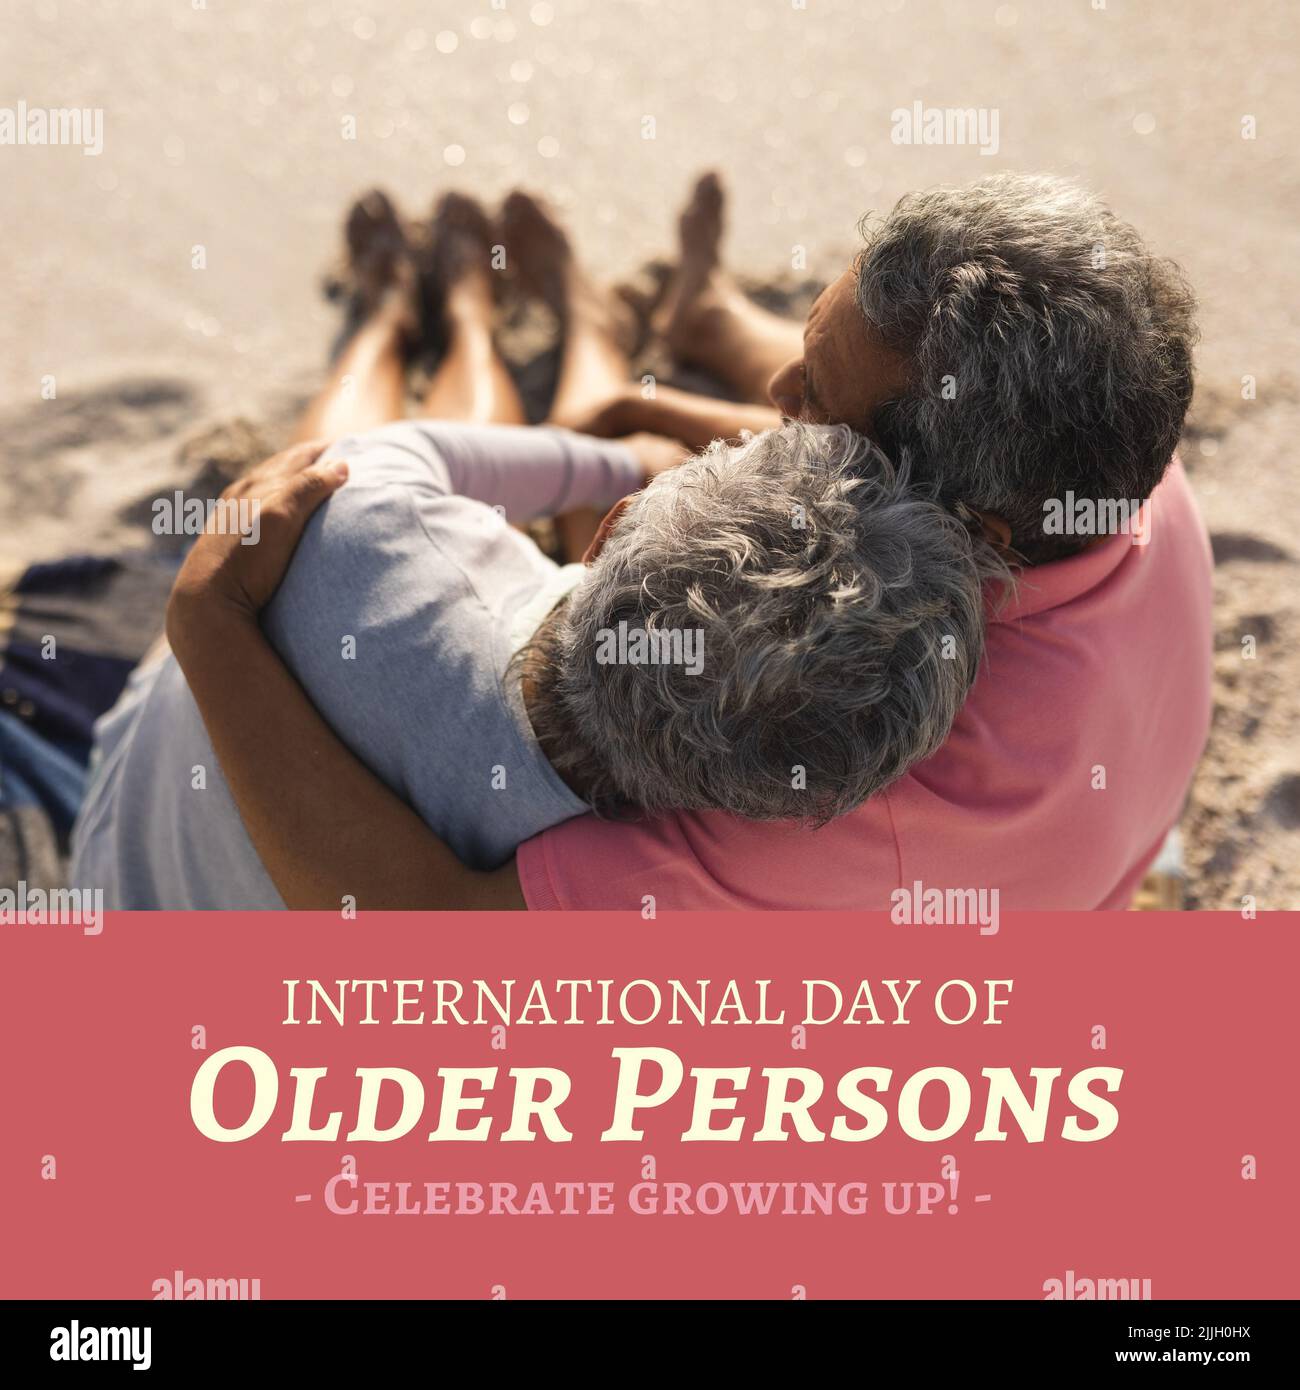 Image of international day of older persons over senior biracial couple embracing on beach Stock Photo